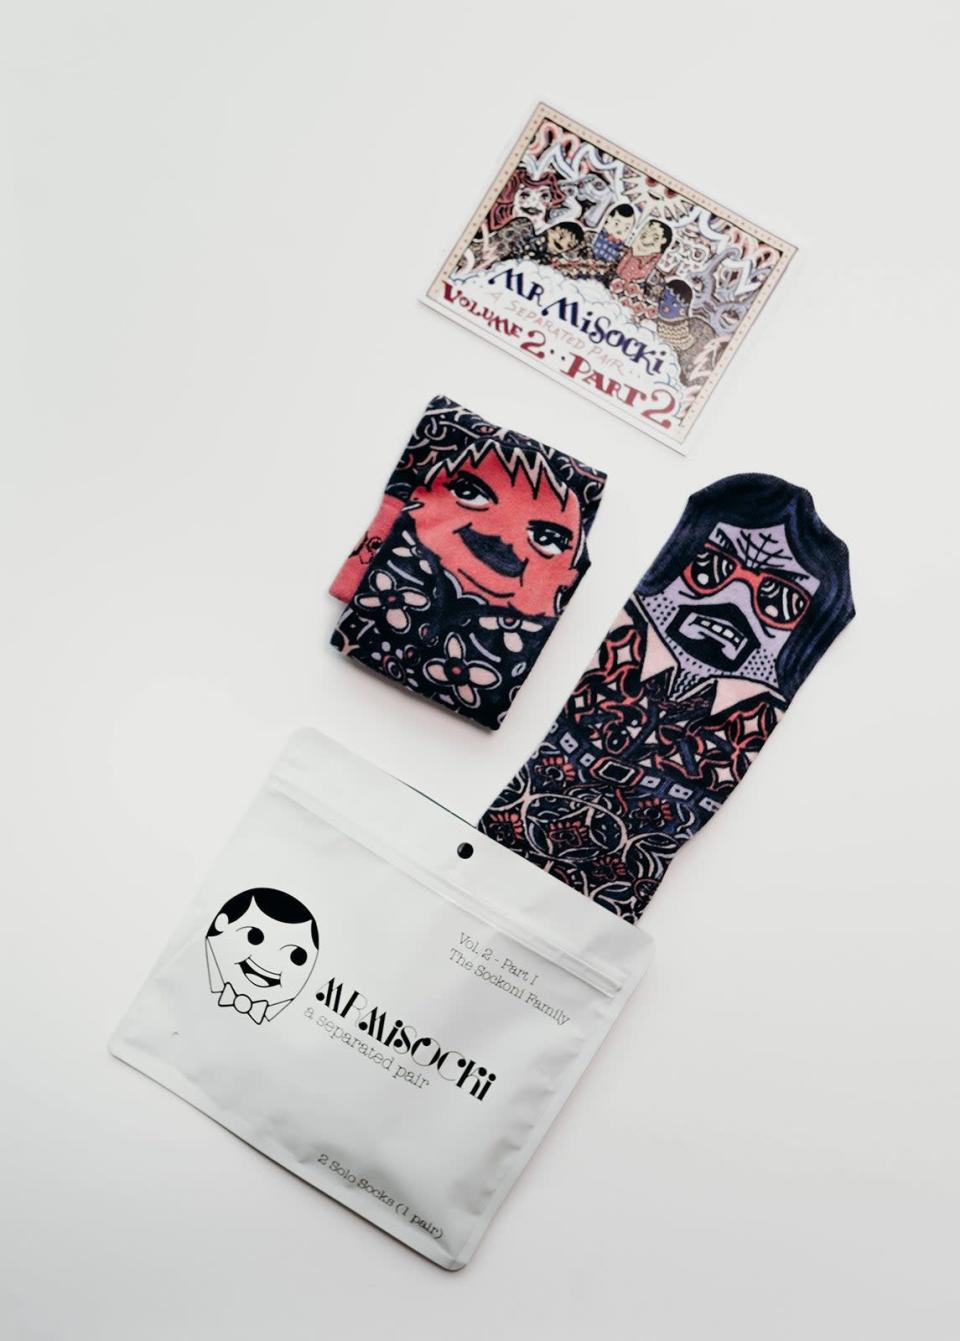 <h2>MrMiSocki 3-Pack Comic Socks</h2><br>But seriously, what's a gift guide without a pair of socks or <em>two</em>? Bear with us, this pair is special. This charming oddball gift from creative sock-enthusiast Munish Taneja is a pair of mismatched socks that come with a comic book about a sock who wakes in the dryer only to realize that he's lost his other half. The "volumes" are limited, so snatch up what's left for the person who likes a gift with a story, comic illustrations, or simply a funky pair of socks to brighten his day. Currently, when you buy three or more pairs of these fun-lovin' foot huggers, you can snag 60% off your entire order.<br><br><strong>Deal: </strong><a href="https://www.mrmisocki.com/collections/volumes" rel="nofollow noopener" target="_blank" data-ylk="slk:60% off + free shipping on three pairs at MrMiSocki" class="link ">60% off + free shipping on three pairs at MrMiSocki</a><br><strong>Promo Code: </strong>None<br><br><strong>MrMiSocki</strong> Volume 2.2- Soxi Brown & ASAP Socky (3-Count), $, available at <a href="https://go.skimresources.com/?id=30283X879131&url=https%3A%2F%2Fwww.mrmisocki.com%2Fcollections%2Fvolumes%2Fproducts%2Fvolume-2-2" rel="nofollow noopener" target="_blank" data-ylk="slk:MrMiSocki" class="link ">MrMiSocki</a>